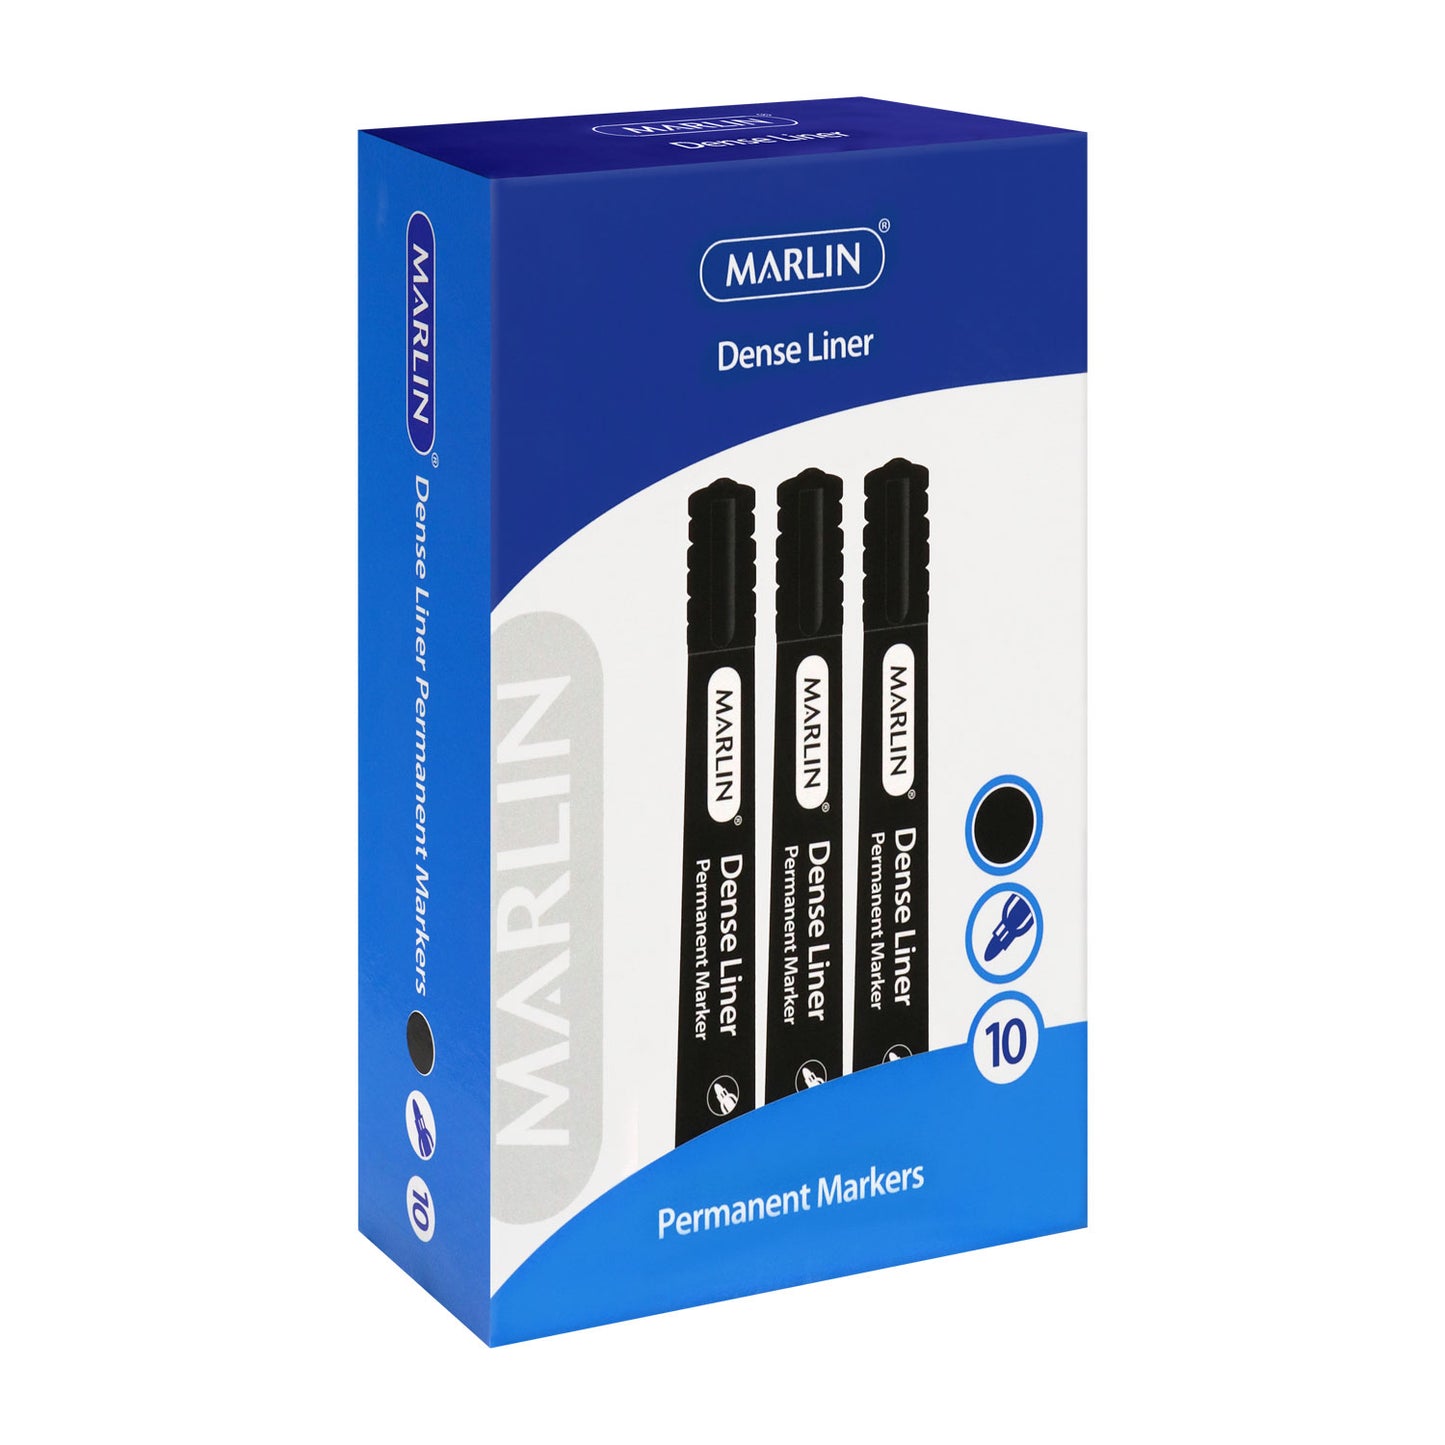 Marlin Dense Liners, Permanent Markers (10) Various Colours